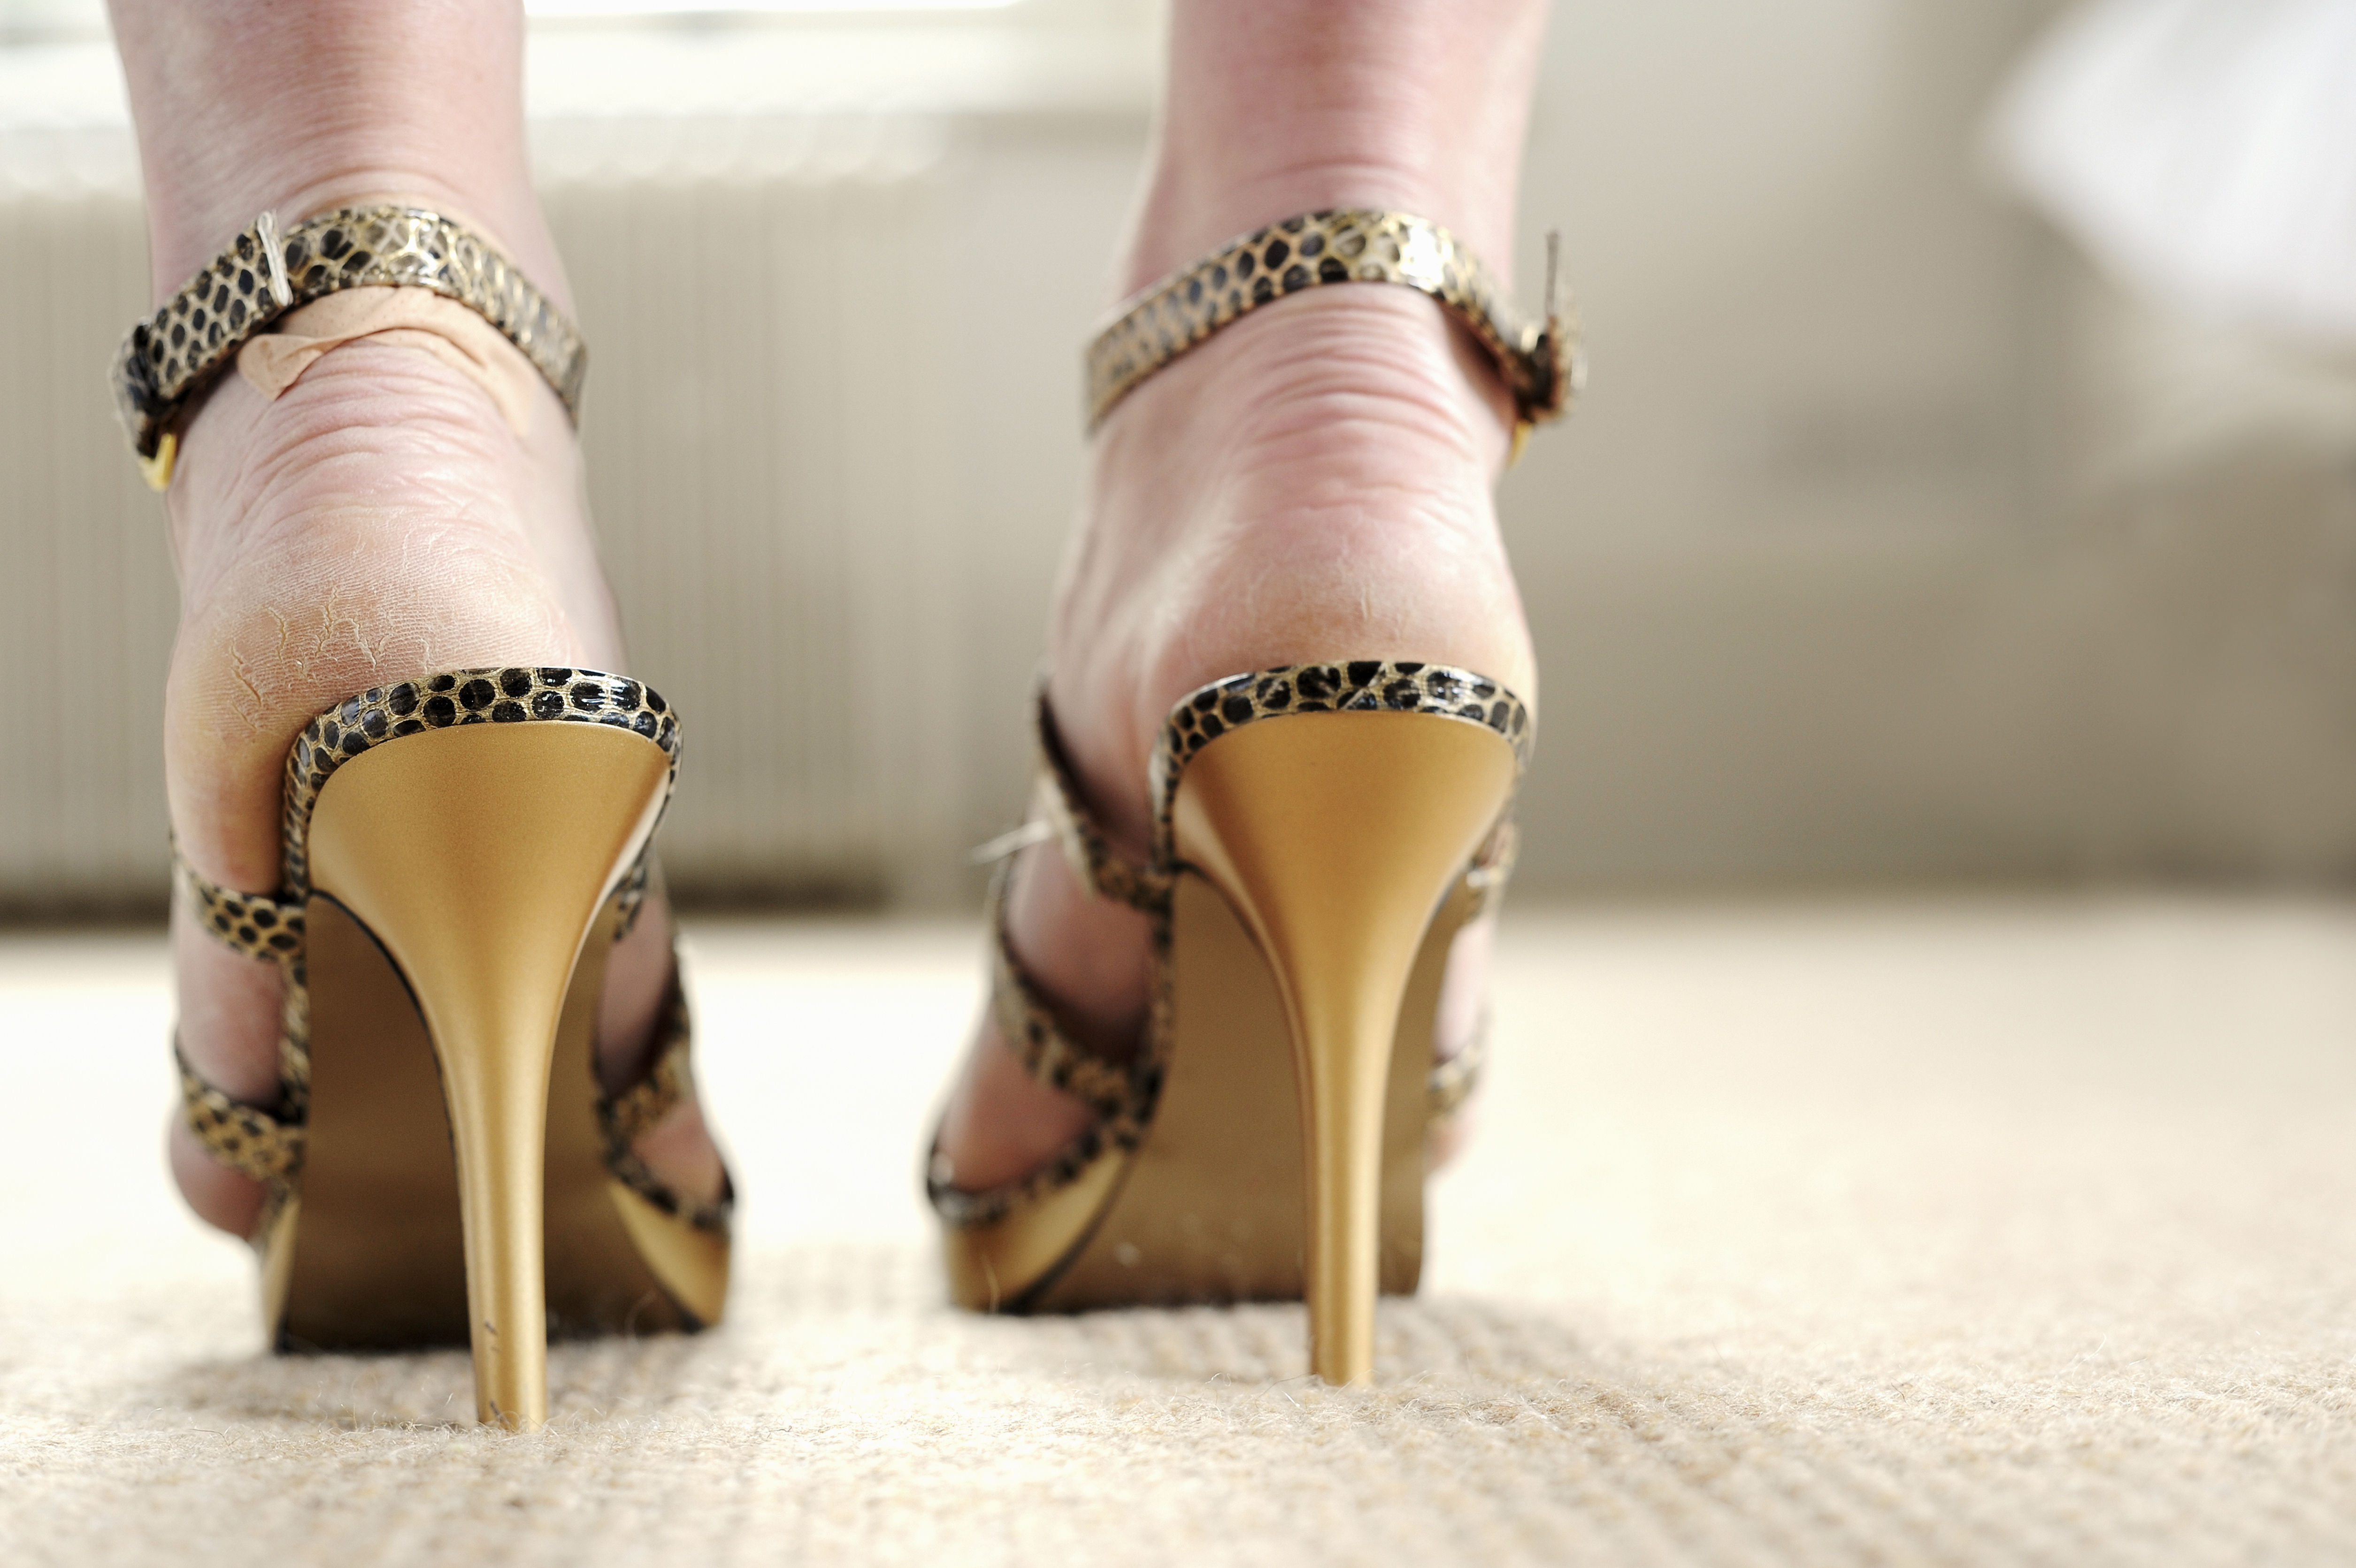 Why are high heels so fun to wear? - Quora